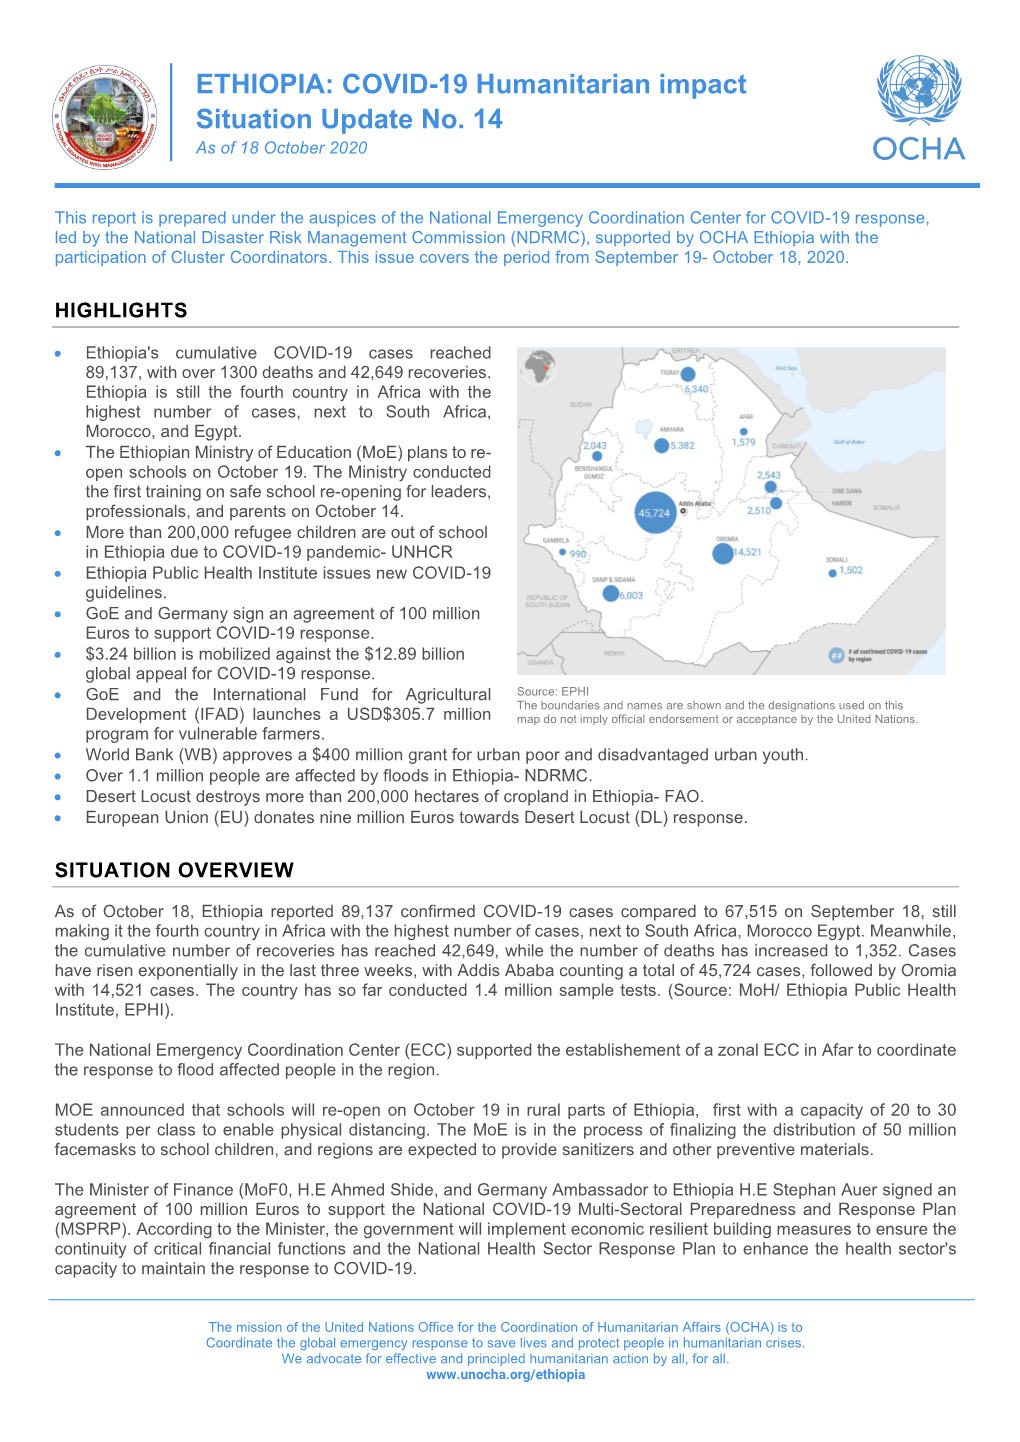 ETHIOPIA: COVID-19 Humanitarian Impact Situation Update No. 14 As of 18 October 2020